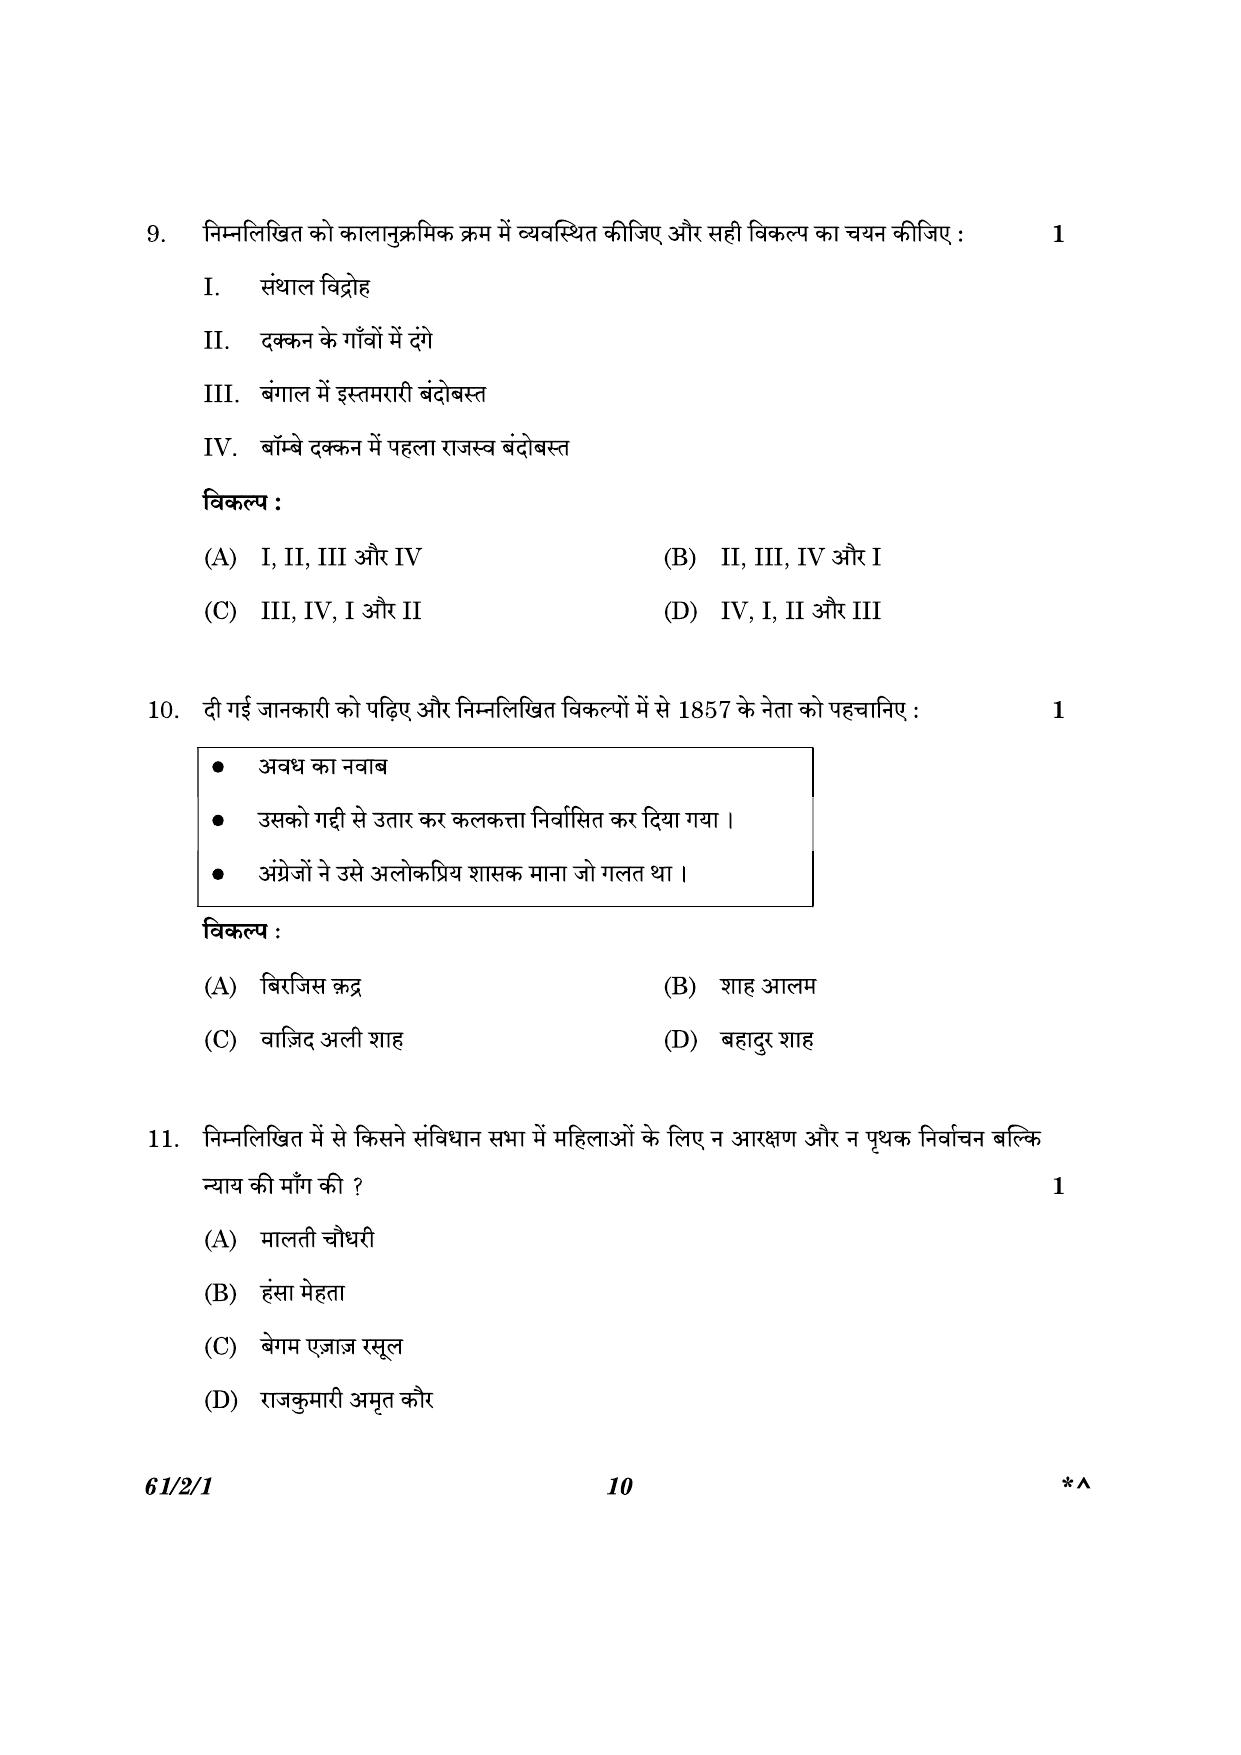 CBSE Class 12 61-2-1 History 2023 Question Paper - Page 10